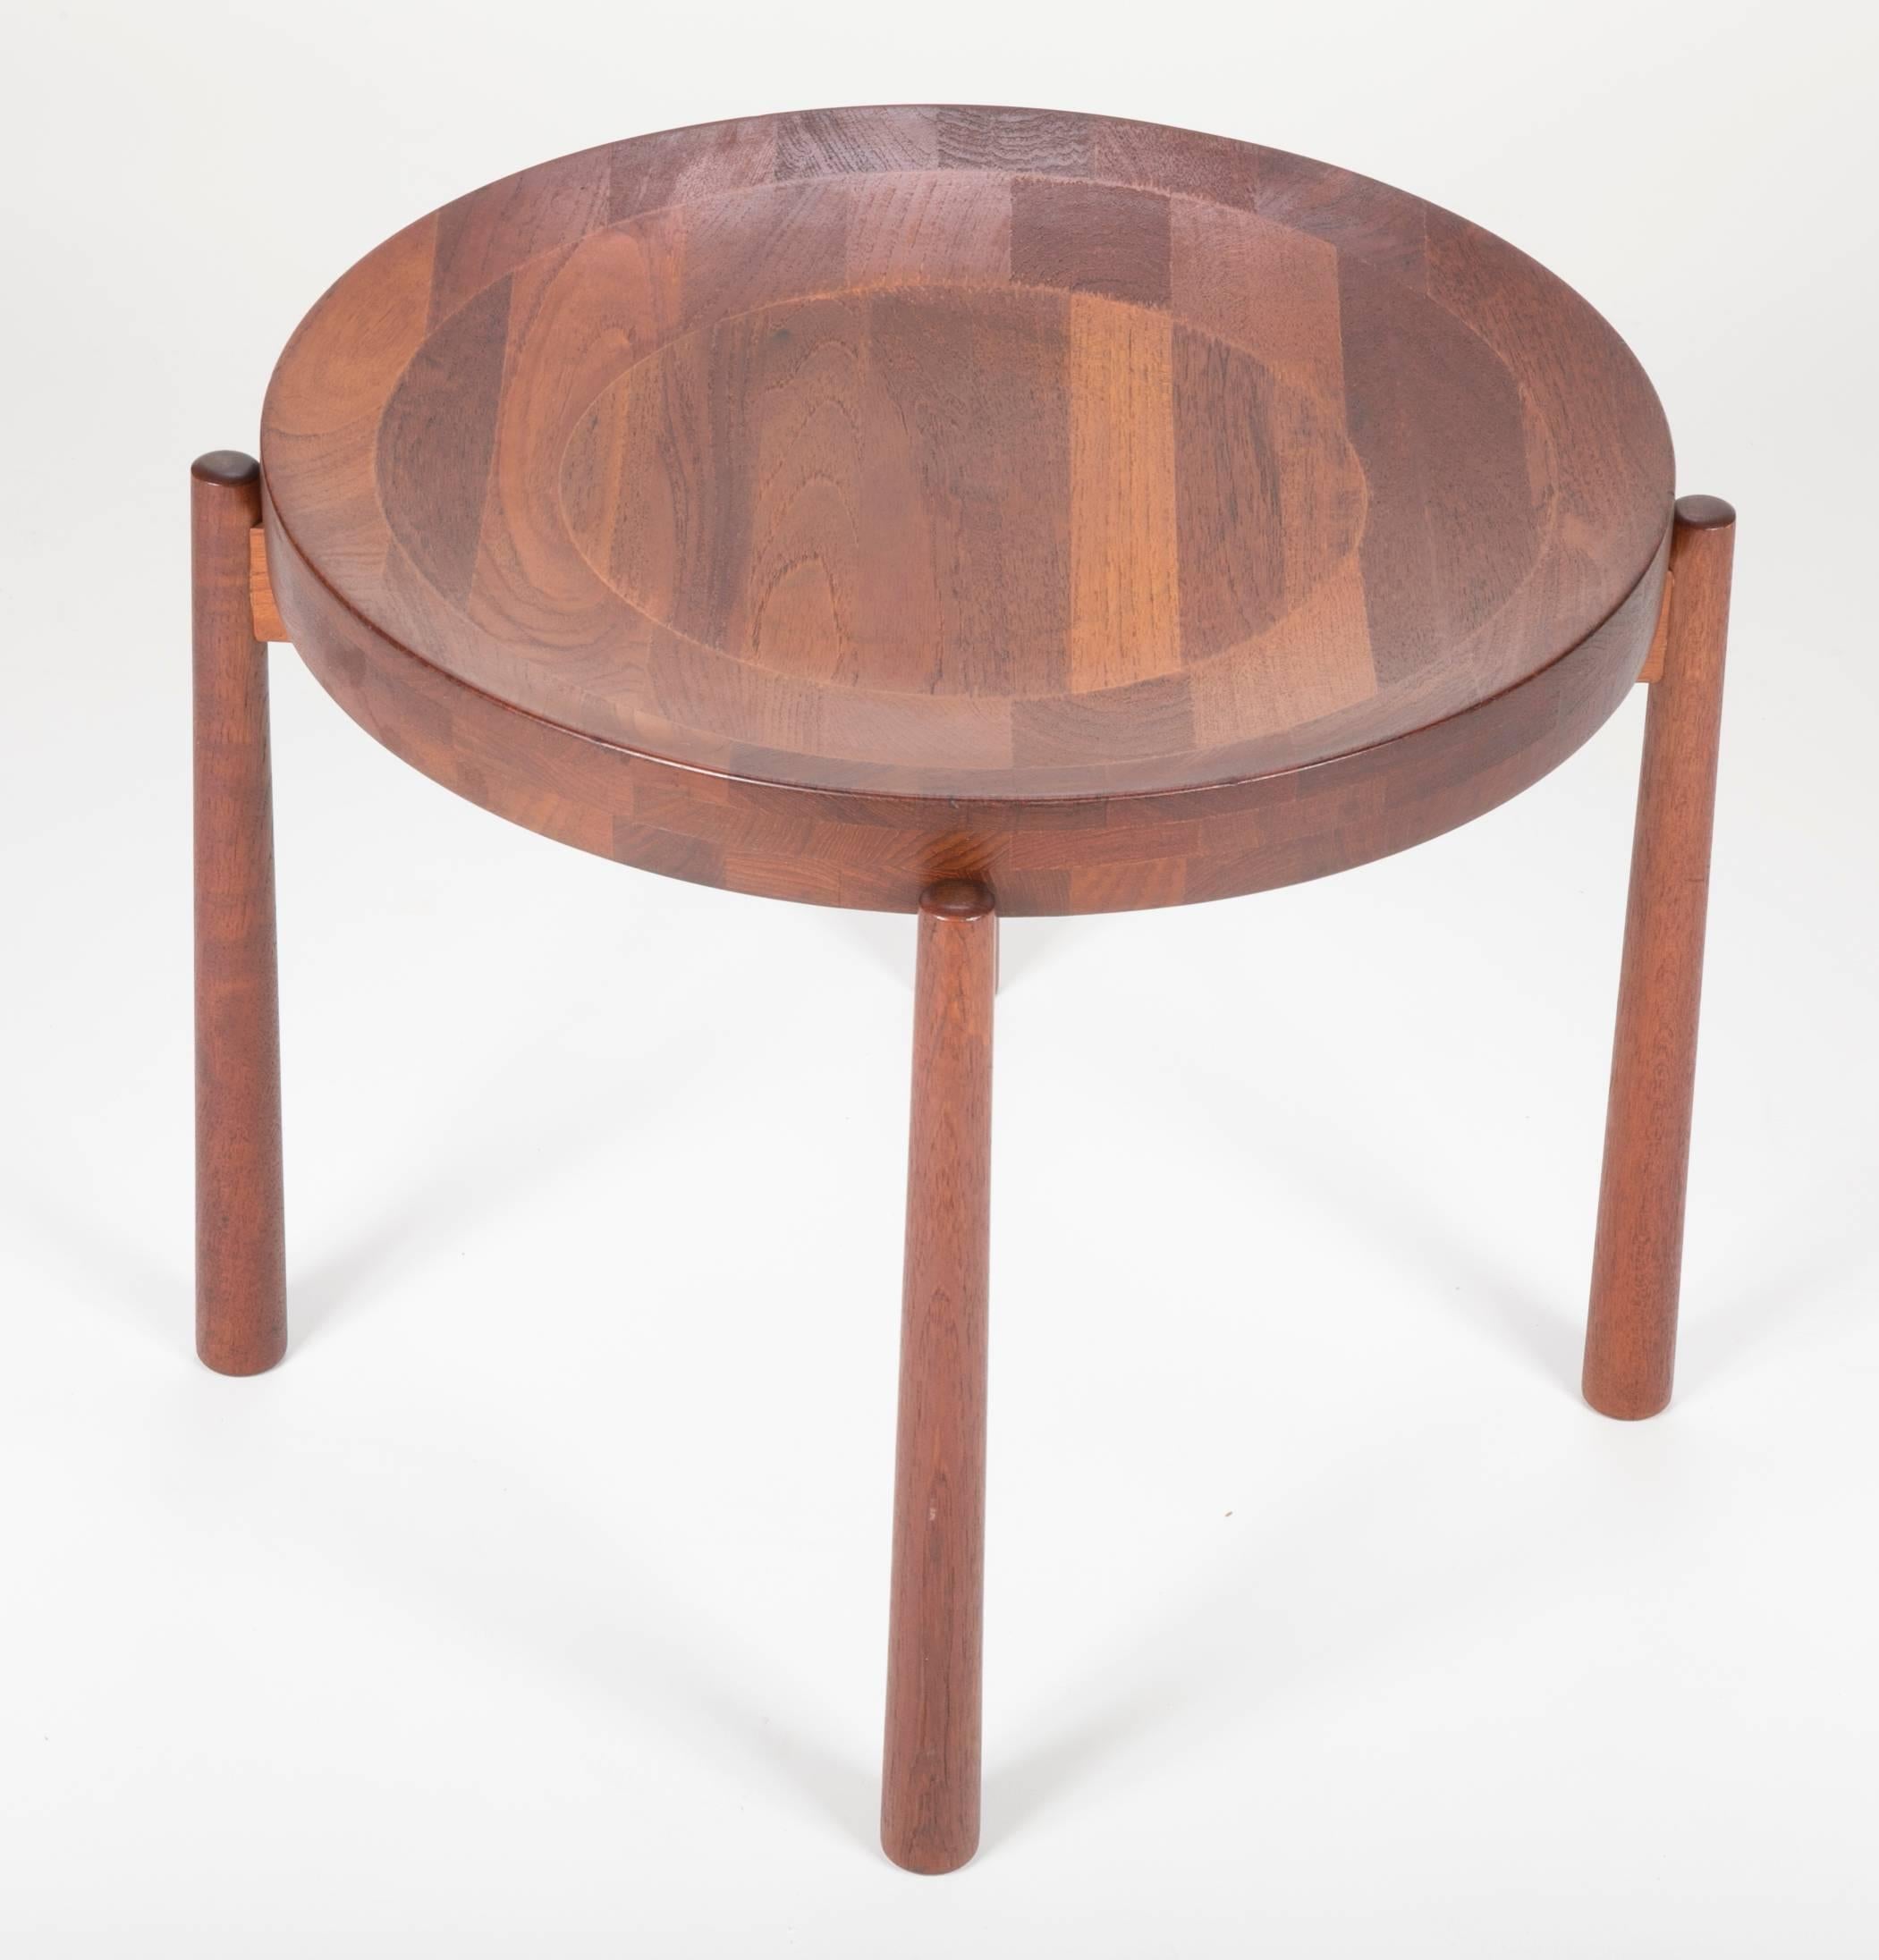 Pair of Midcentury Teak Side Tables, style of  Jens Quistgaard for DUX 1